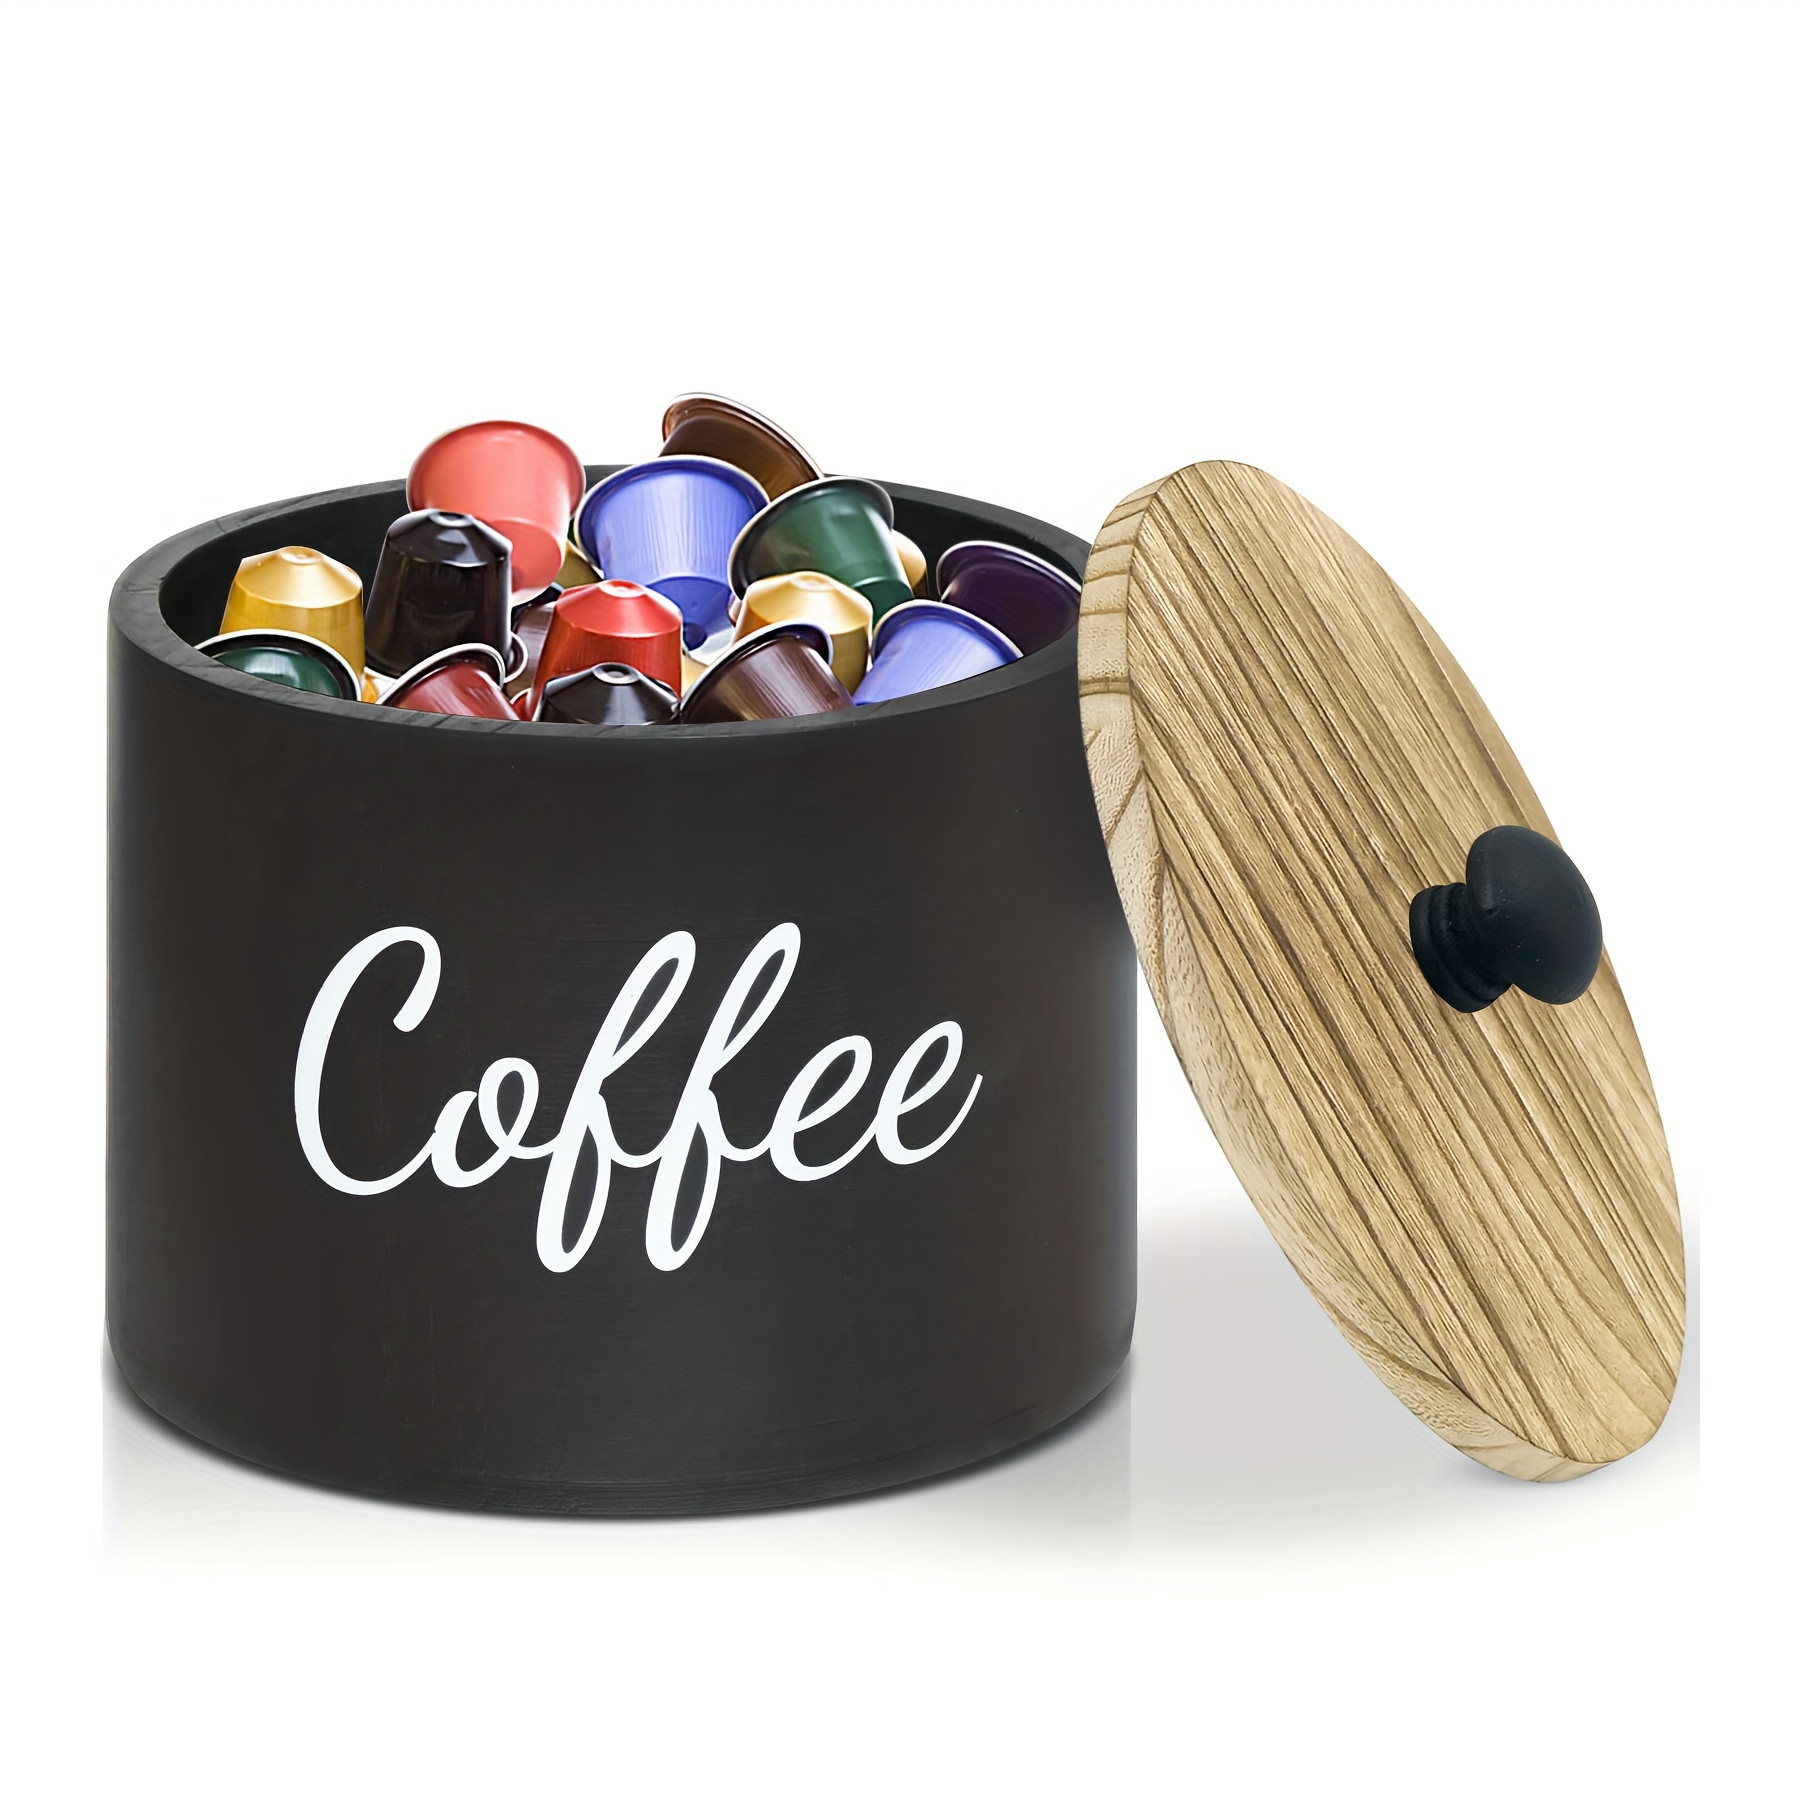 Coffee Station Organizer for Counter, Wood Coffee Pods Holder Storage  Basket, Coffee and Tea Condiment Storage Organizer, Rustic Coffee Bar Decor  for